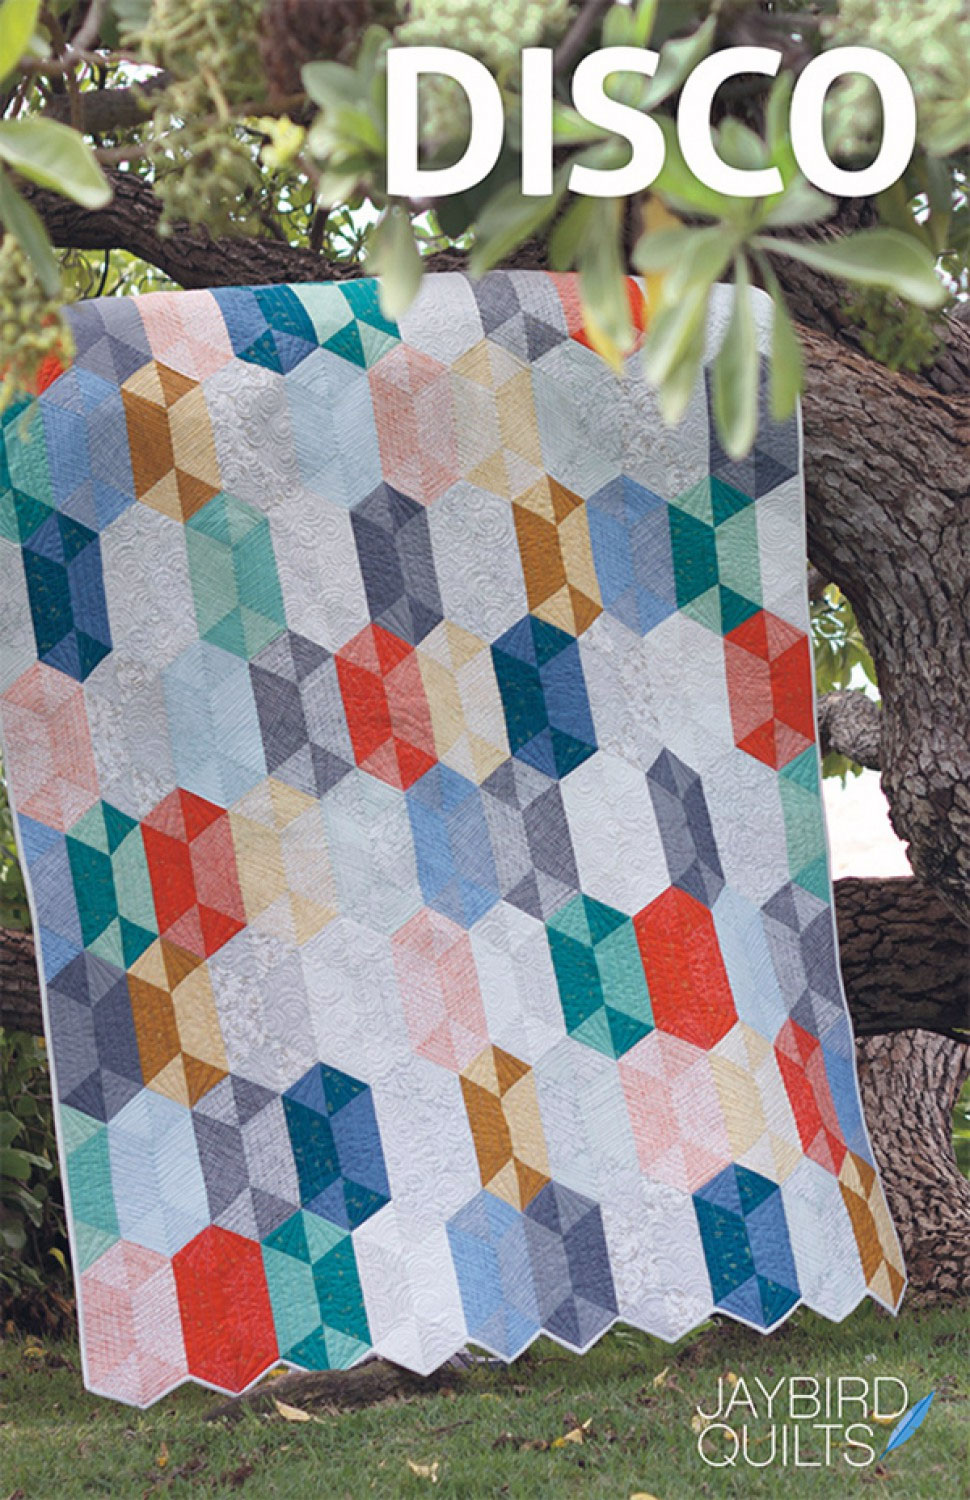 Disco-quilt-sewing-pattern-Julie-Herman-front